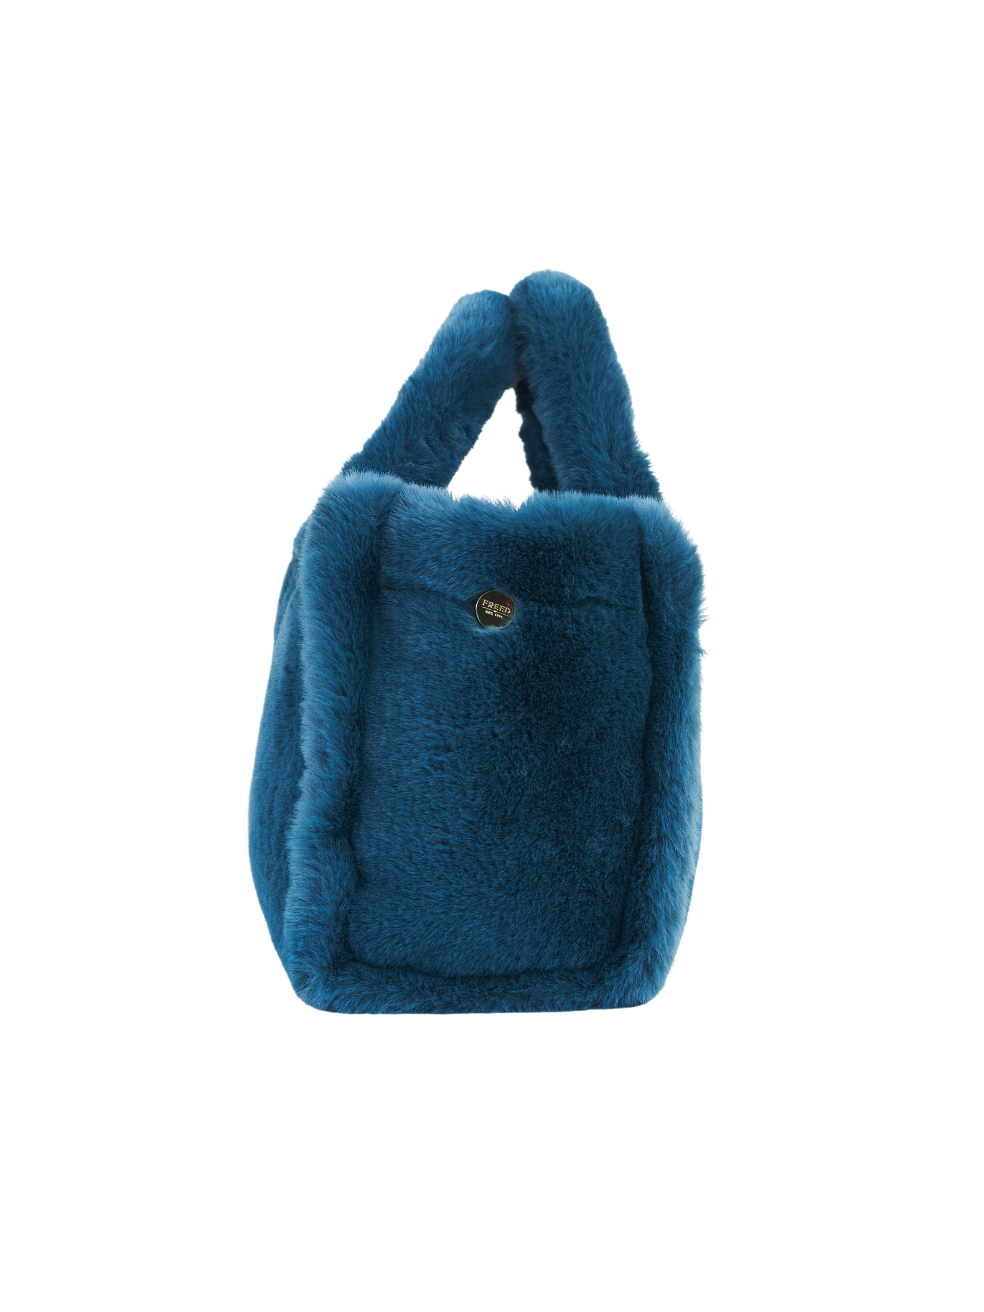 XL Large Tote Bag Sustainable Made in Canada Vegan Fur Peacock Blue